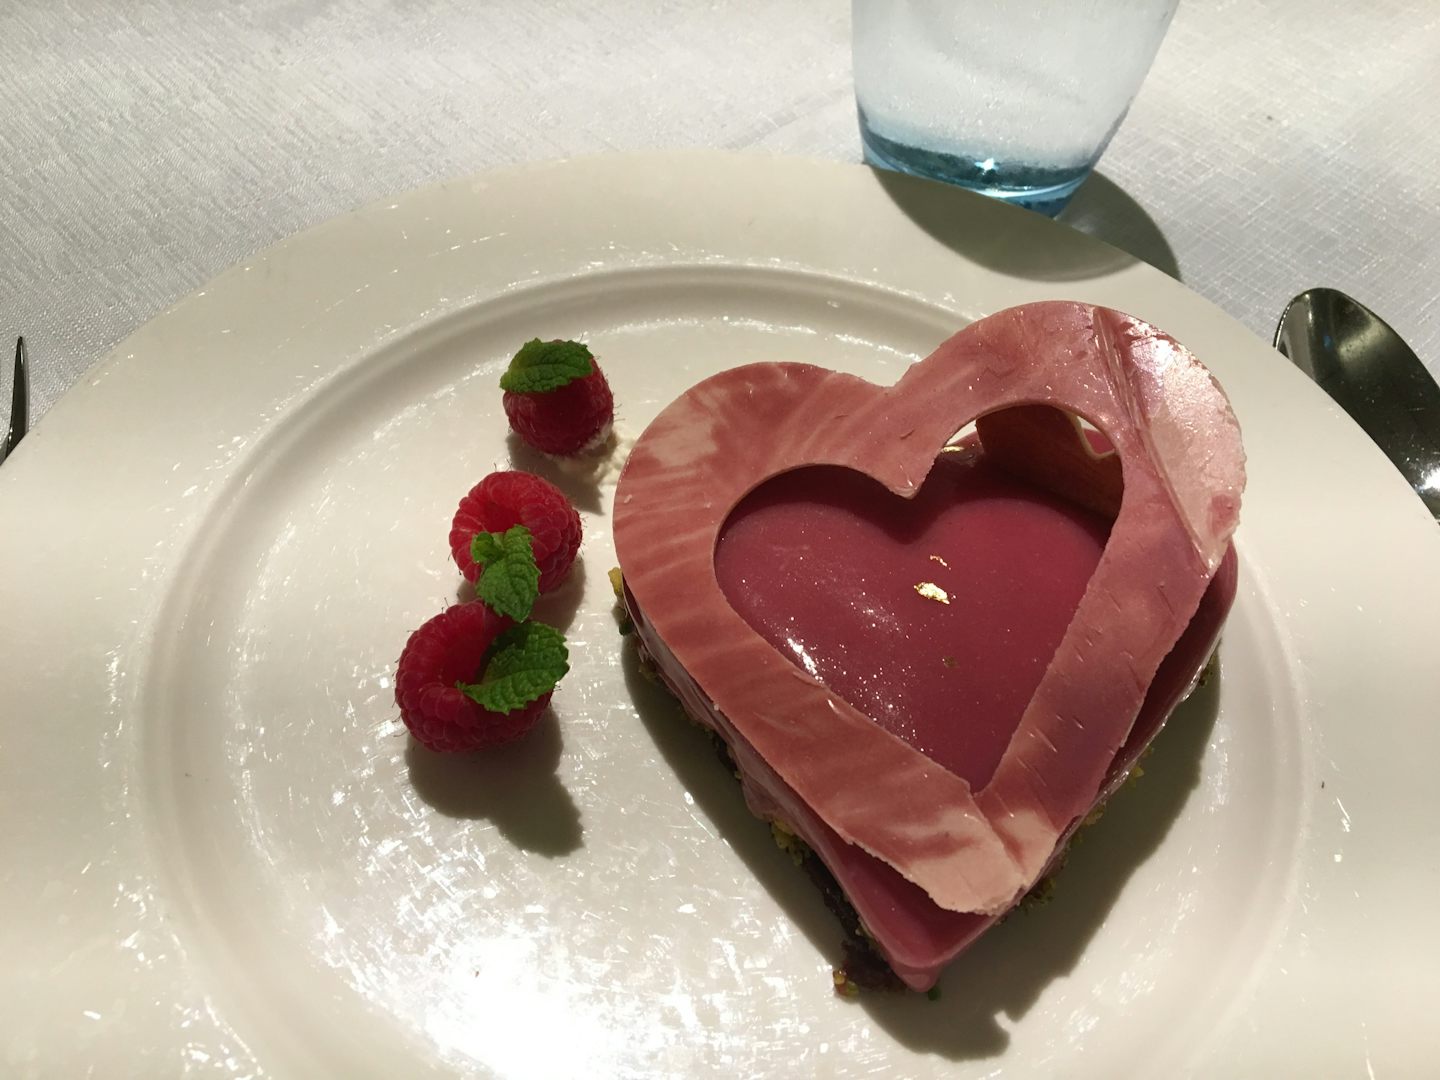 Awesome Valentines Day dessert! Thanks for ALL the amazing food, Viking chefs!